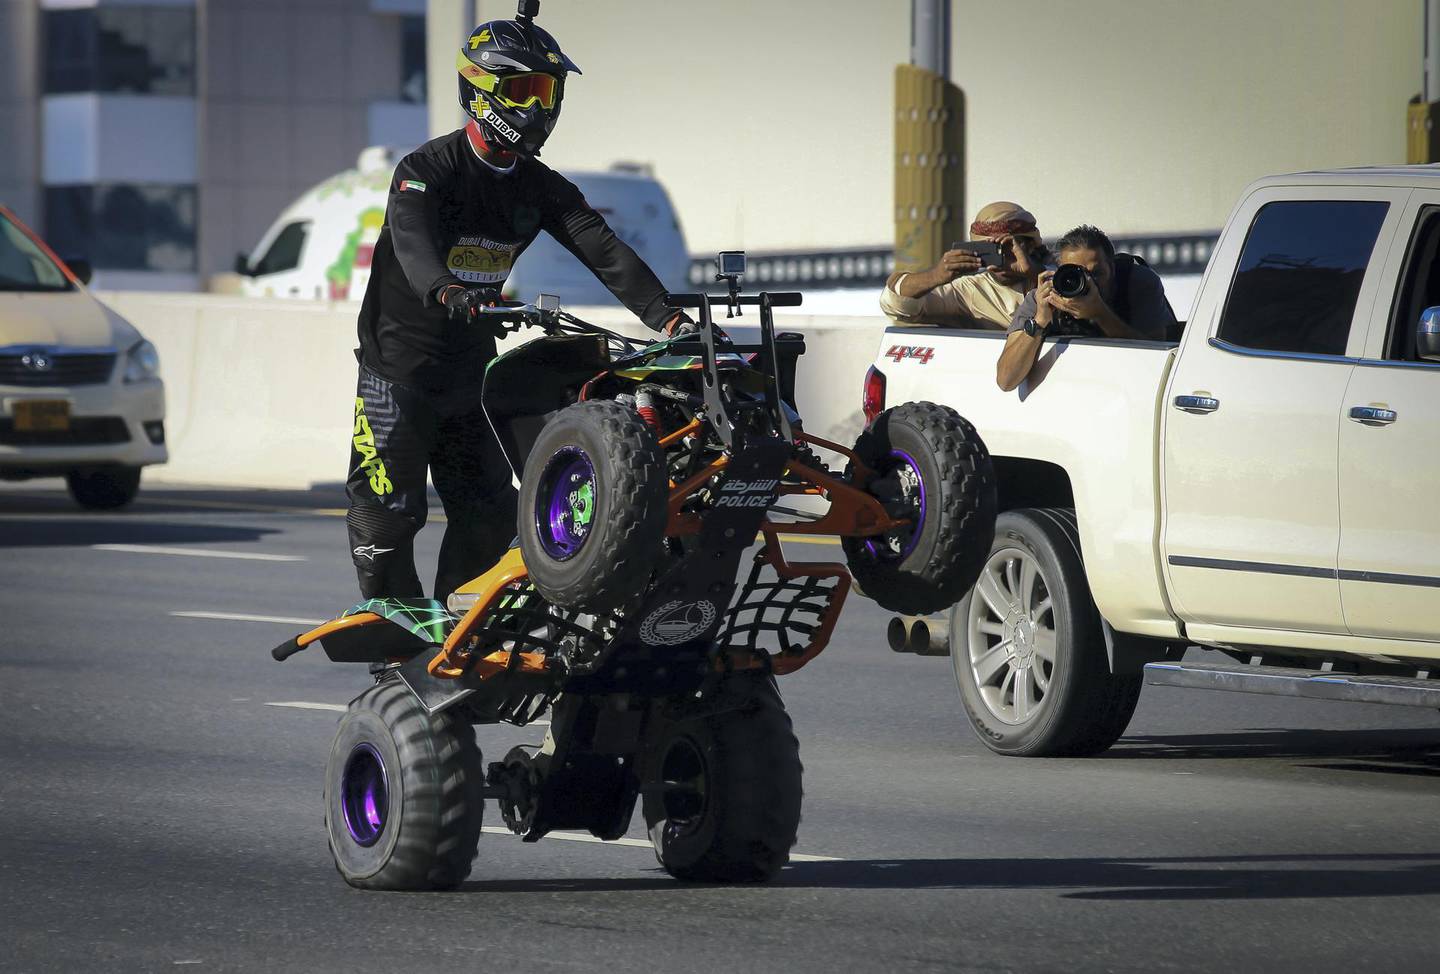 The Dubai Police and Dubai Motorbike Festival break the Guinness World Record for the World’s Longest Wheelie (Distance) on an ATV. Captain Abdulla Hattawi, a member of the Dubai Police Force, Dubai Police Stunt Team and one of the top ATV stunt athletes in the world has set the new record at an impressive 60km. Captain Abdulla Hattawi said, “I’m so proud to now be the Guinness World Record holder for the World’s Longest Wheelie on an ATV and to achieve another Guinness World Record for Dubai Police. It was an amazing experience and thank you to everyone who has supported us!” (Dubai Police handout) 